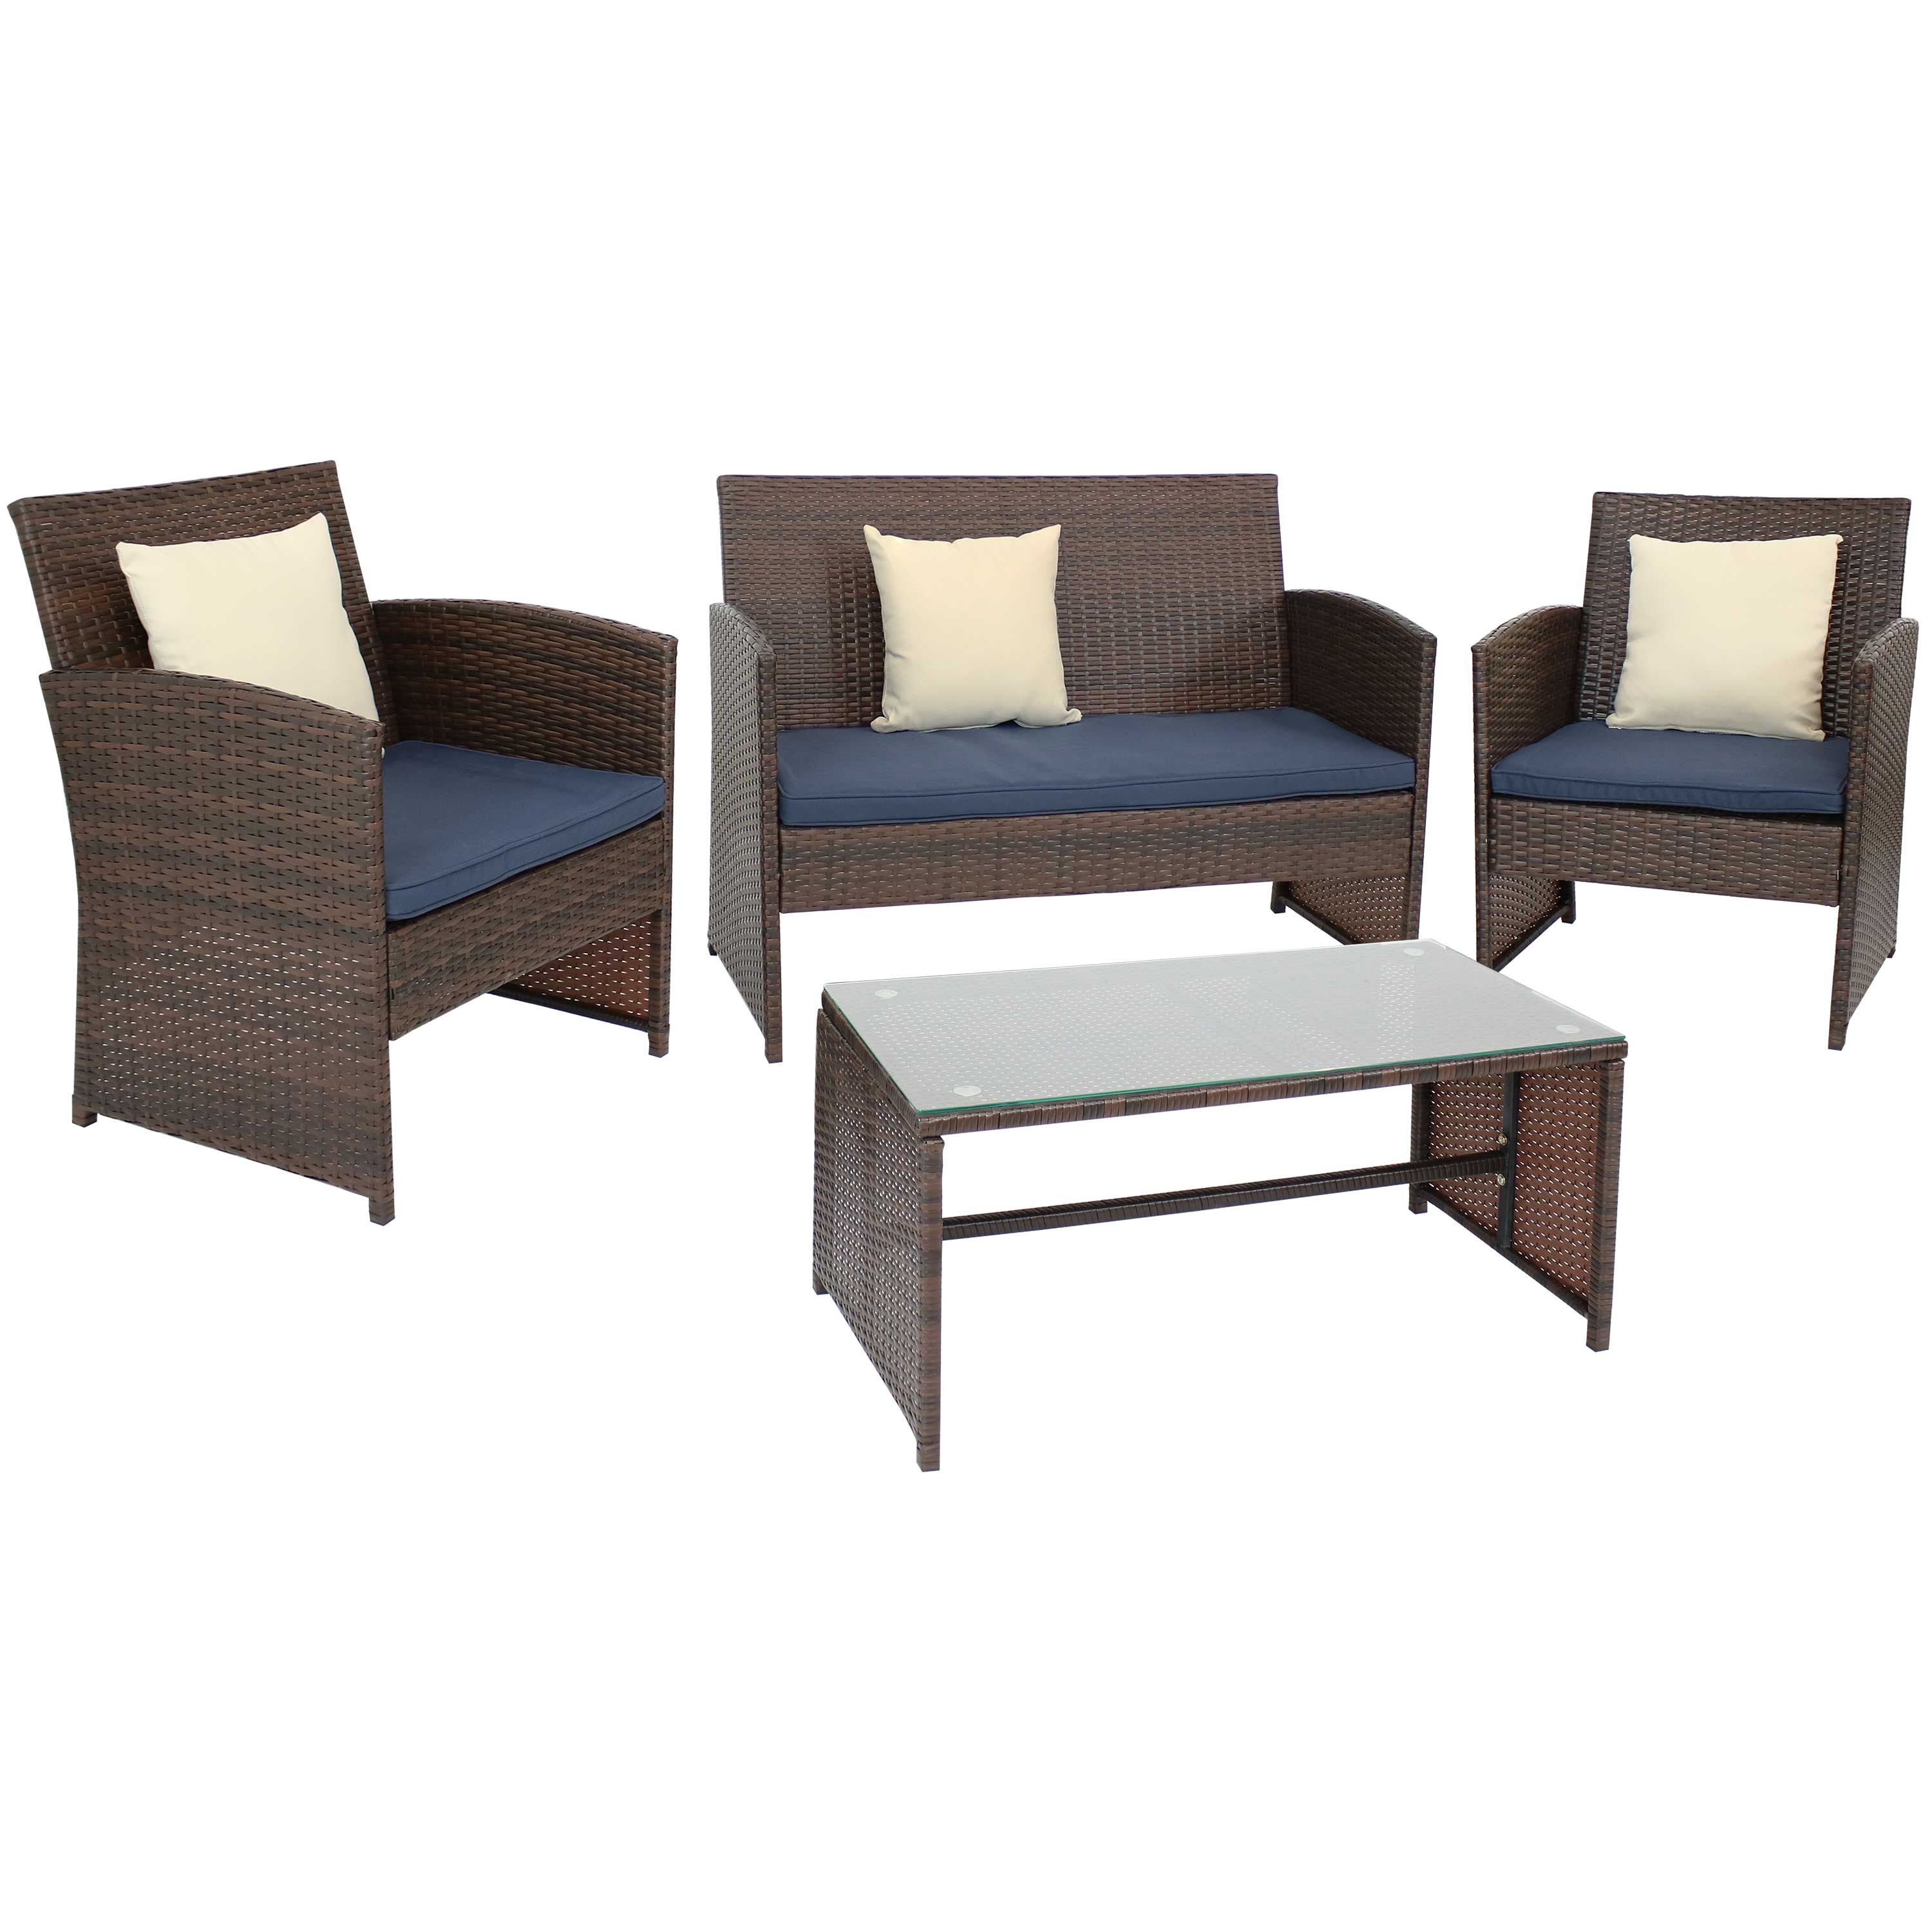 Sunnydaze Ardfield 4-Piece Patio Set with Navy Cushions - Mixed Brown Rattan